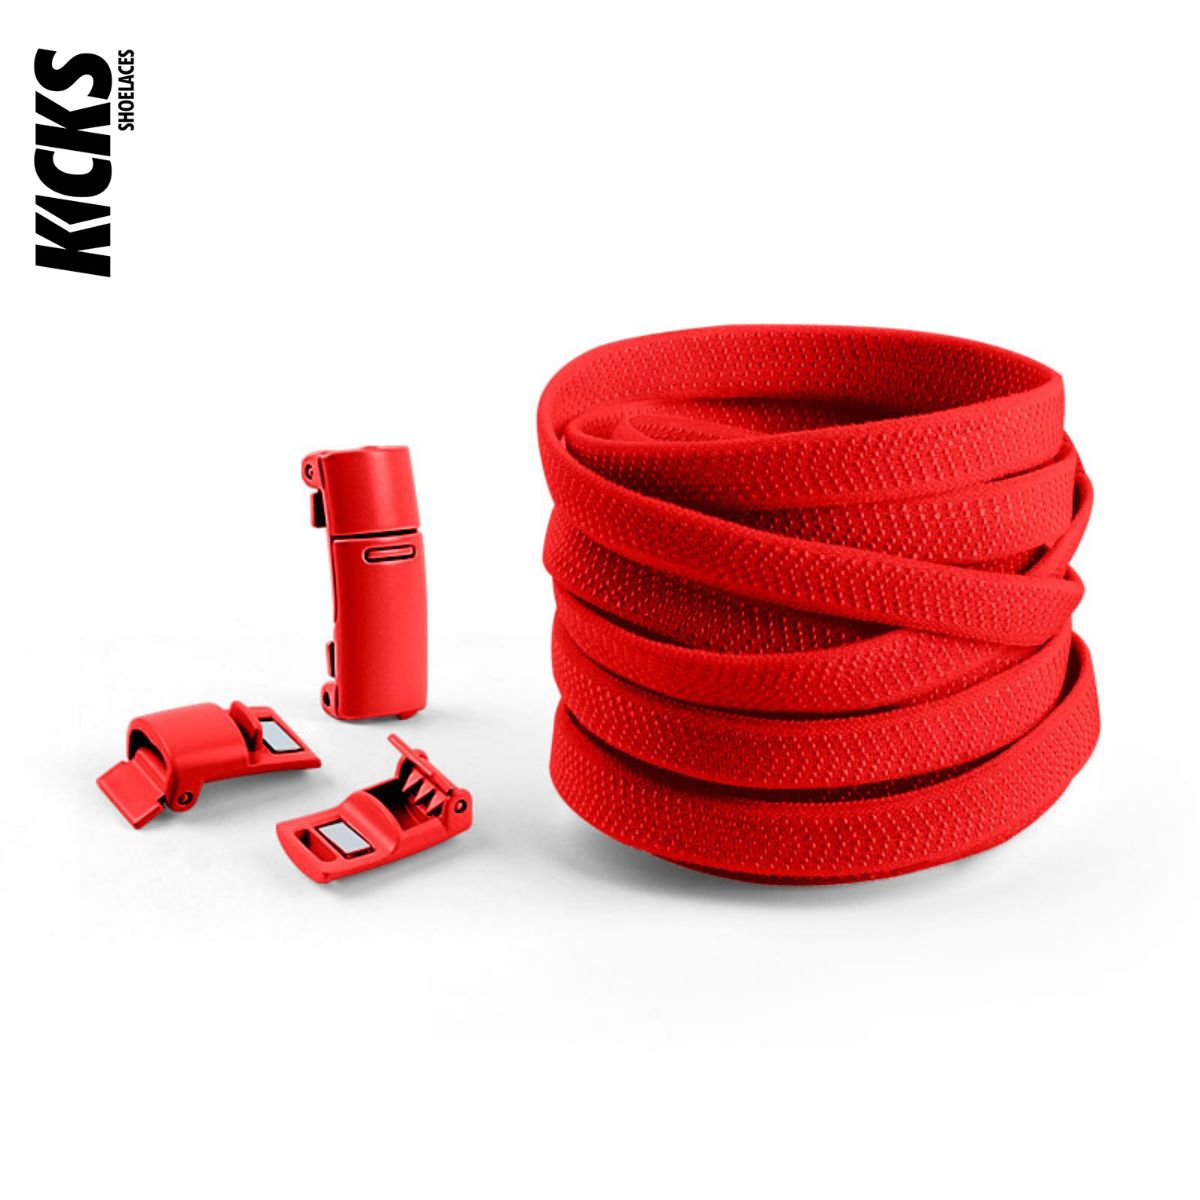 Red No-Tie Shoelaces with Magnetic Locks - Kicks Shoelaces